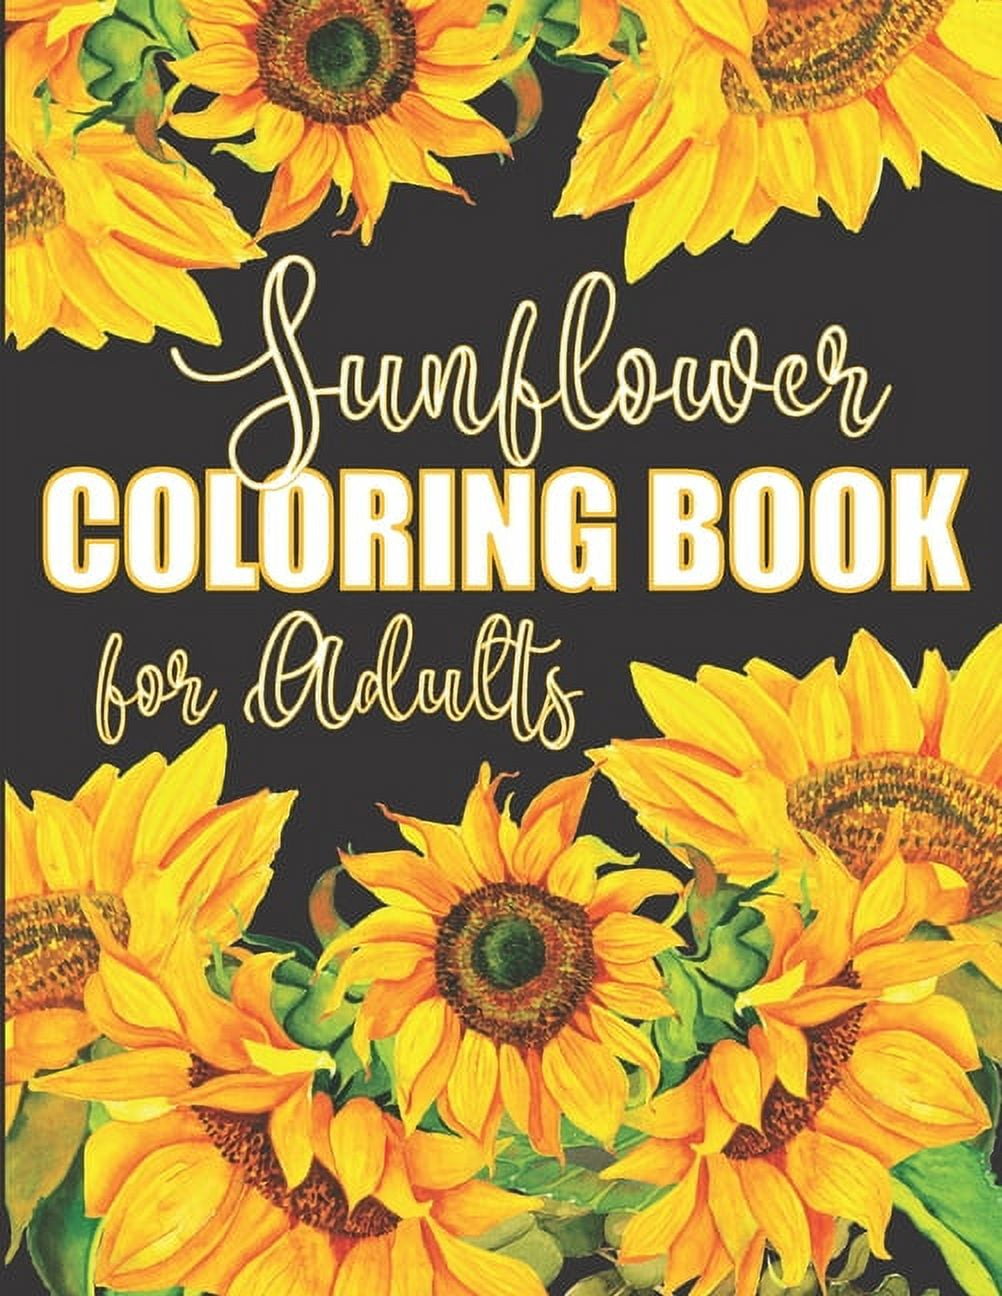 Flowers Coloring Book for Adults Relaxation: a Coloring Book with Beautiful  Realistic Flowers, Bouquets, Floral Designs, Sunflowers, Roses, Leaves, Sp  (Paperback)